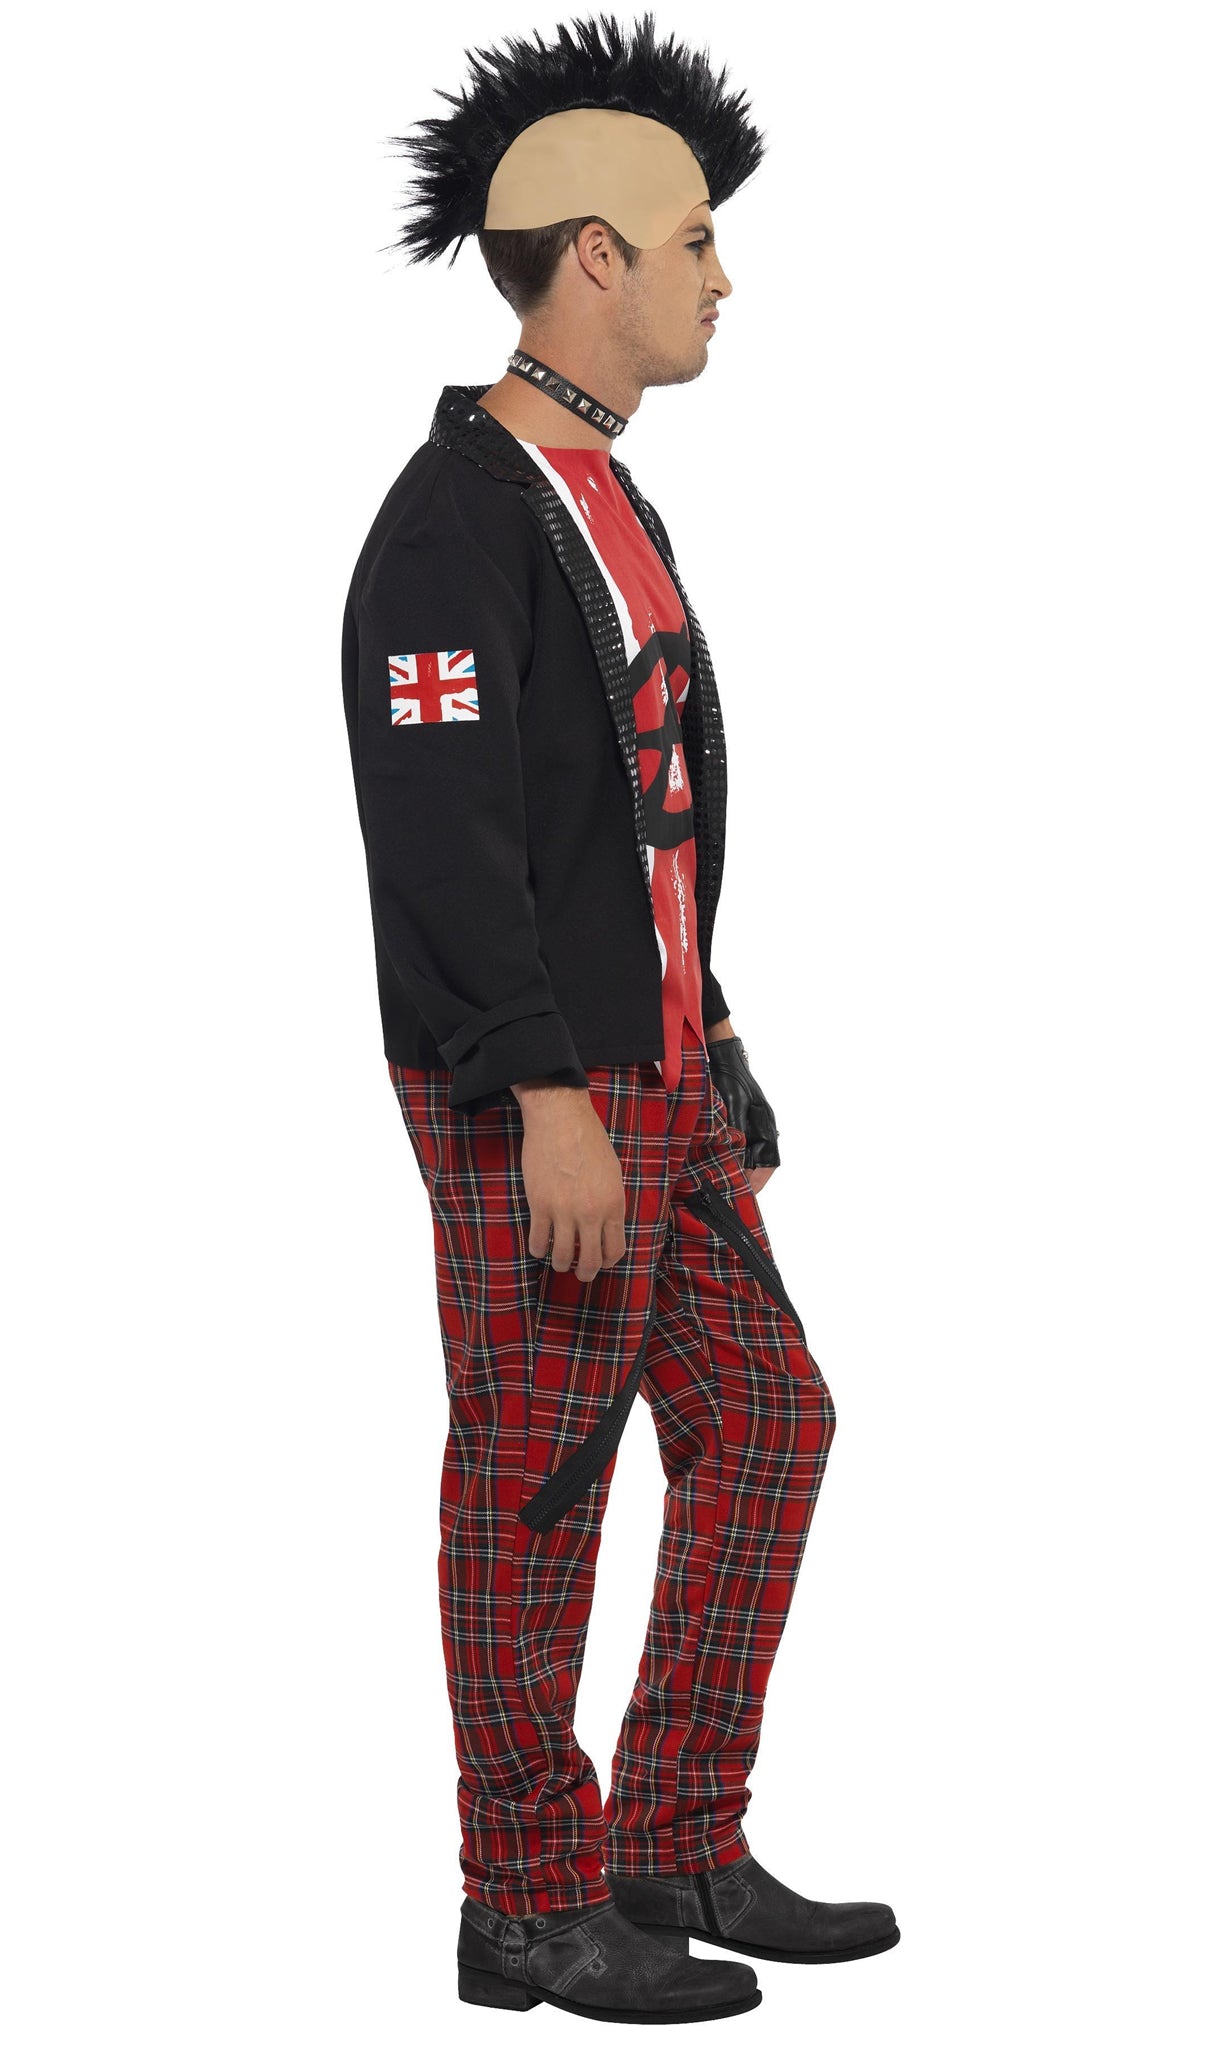 Side of black punk jacket with white and red top, with tartan pants